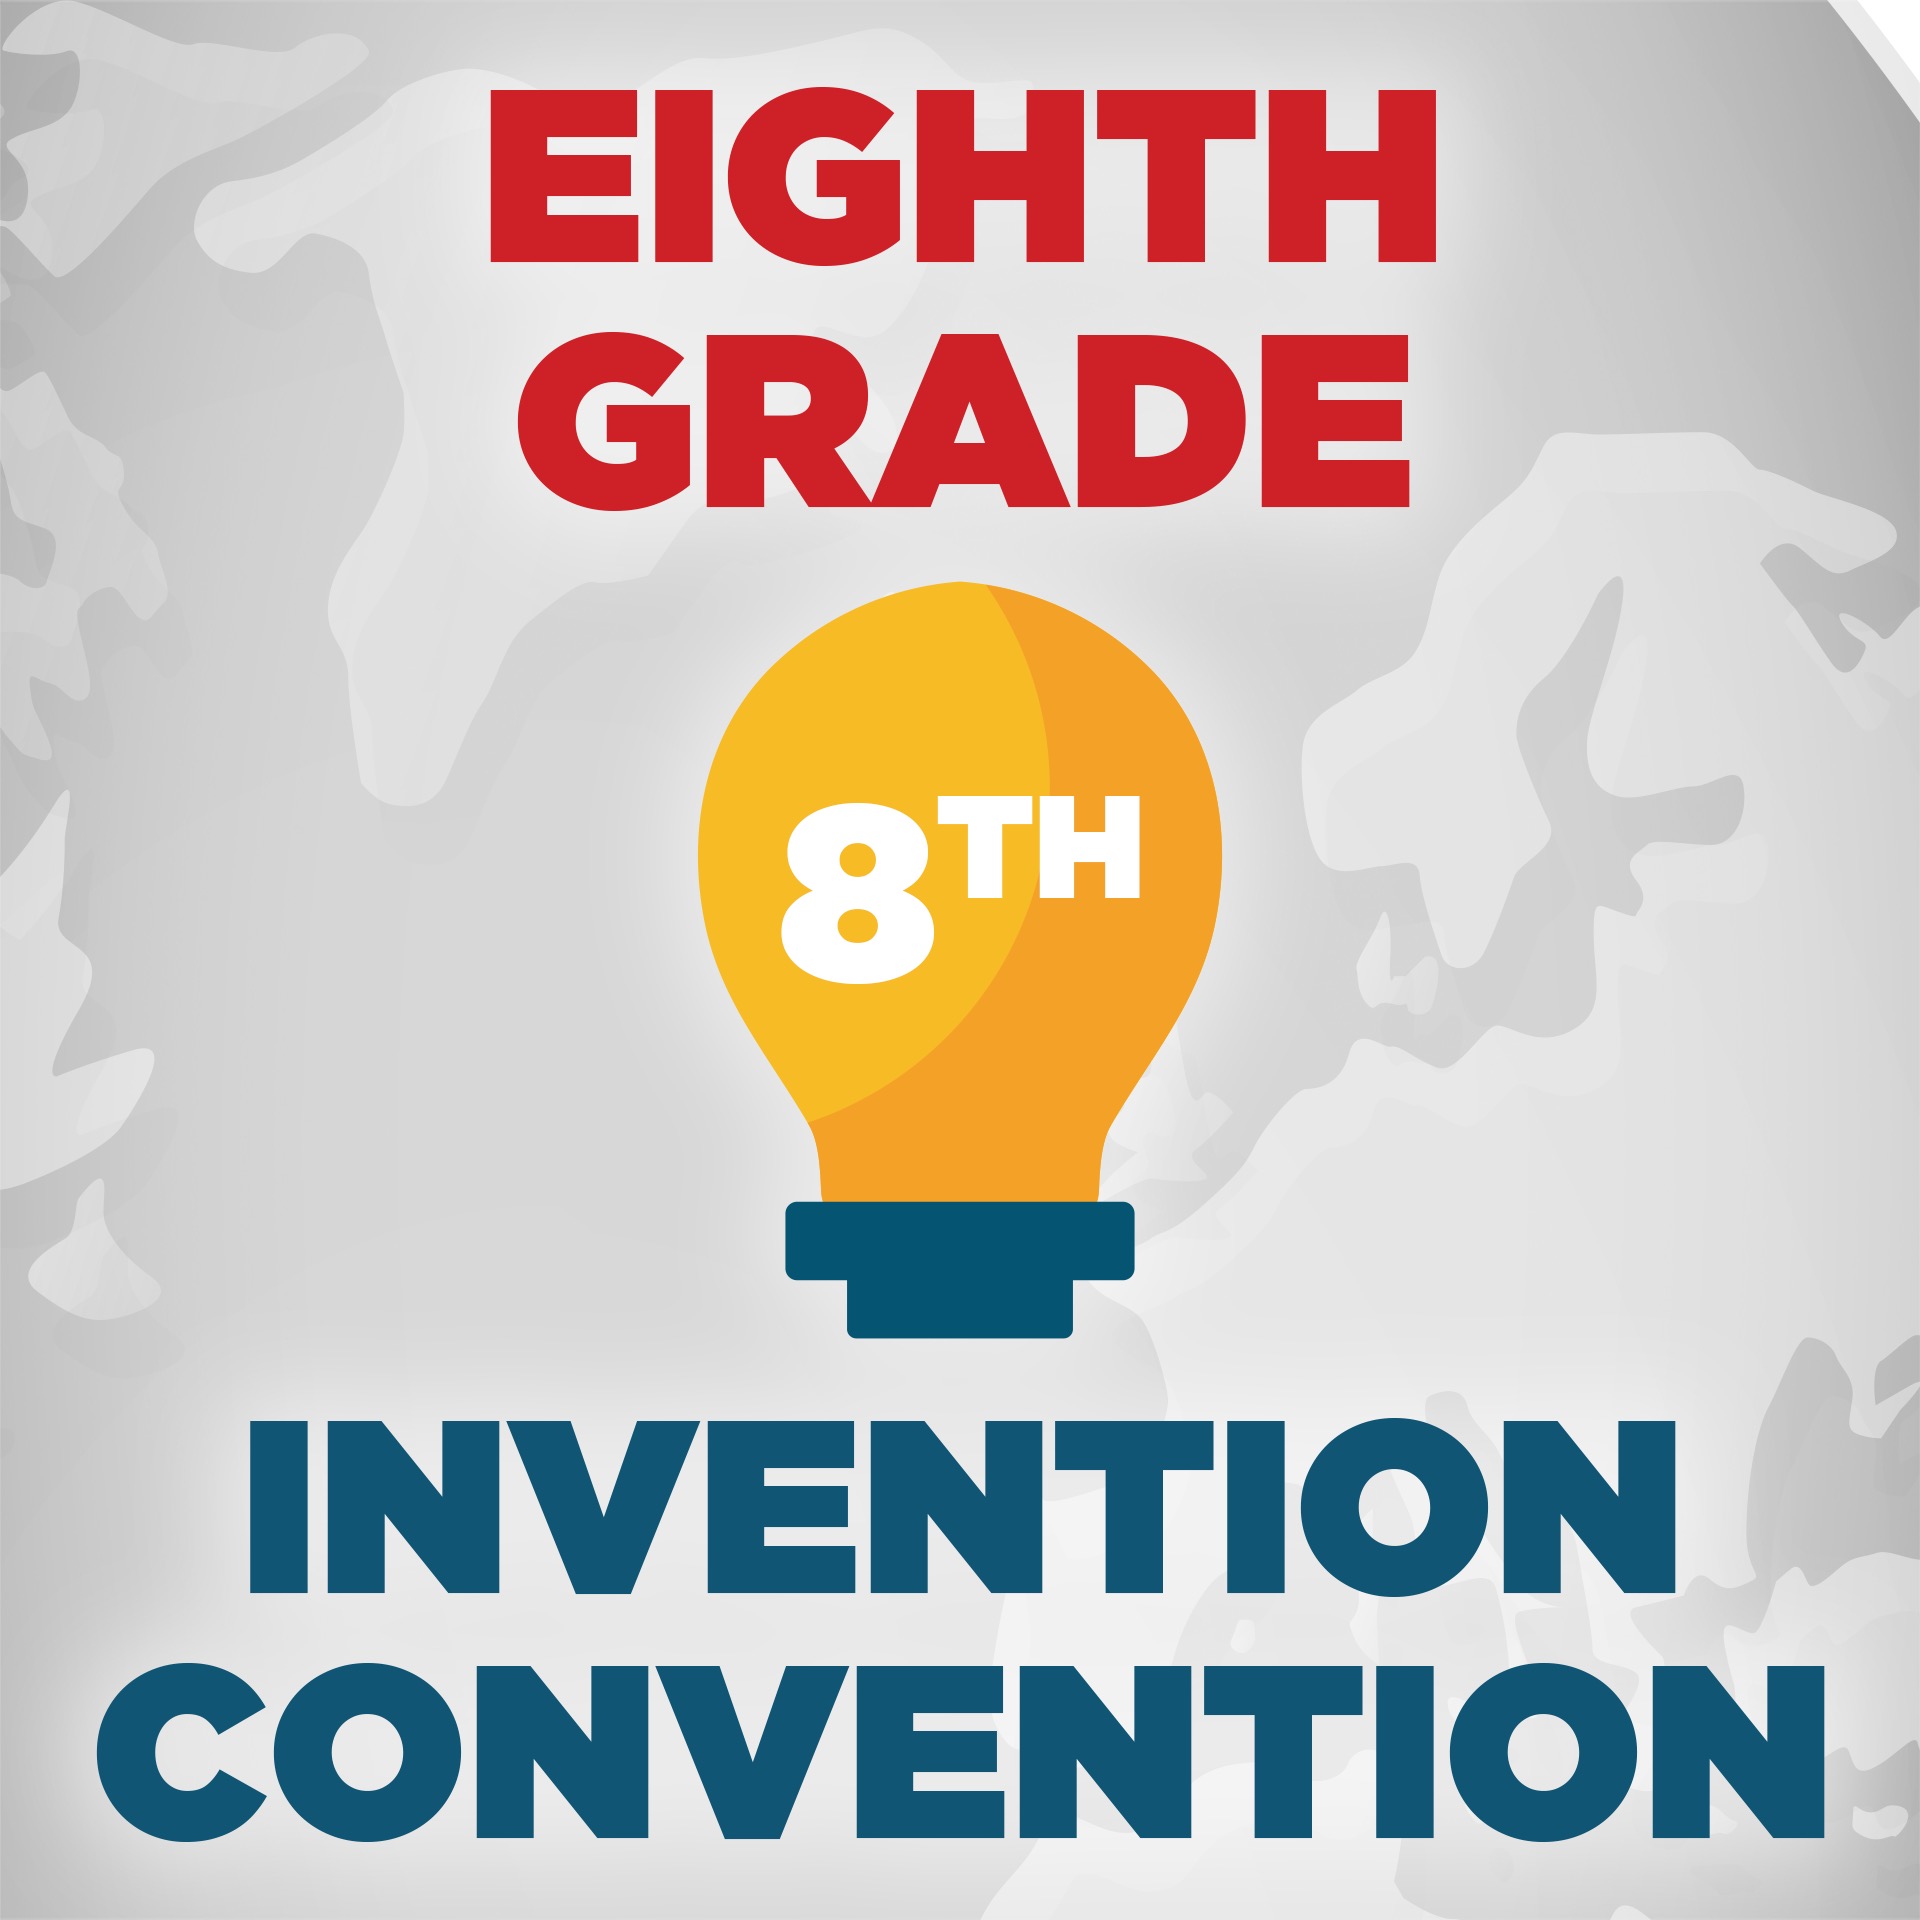 8th Invention Convention copy